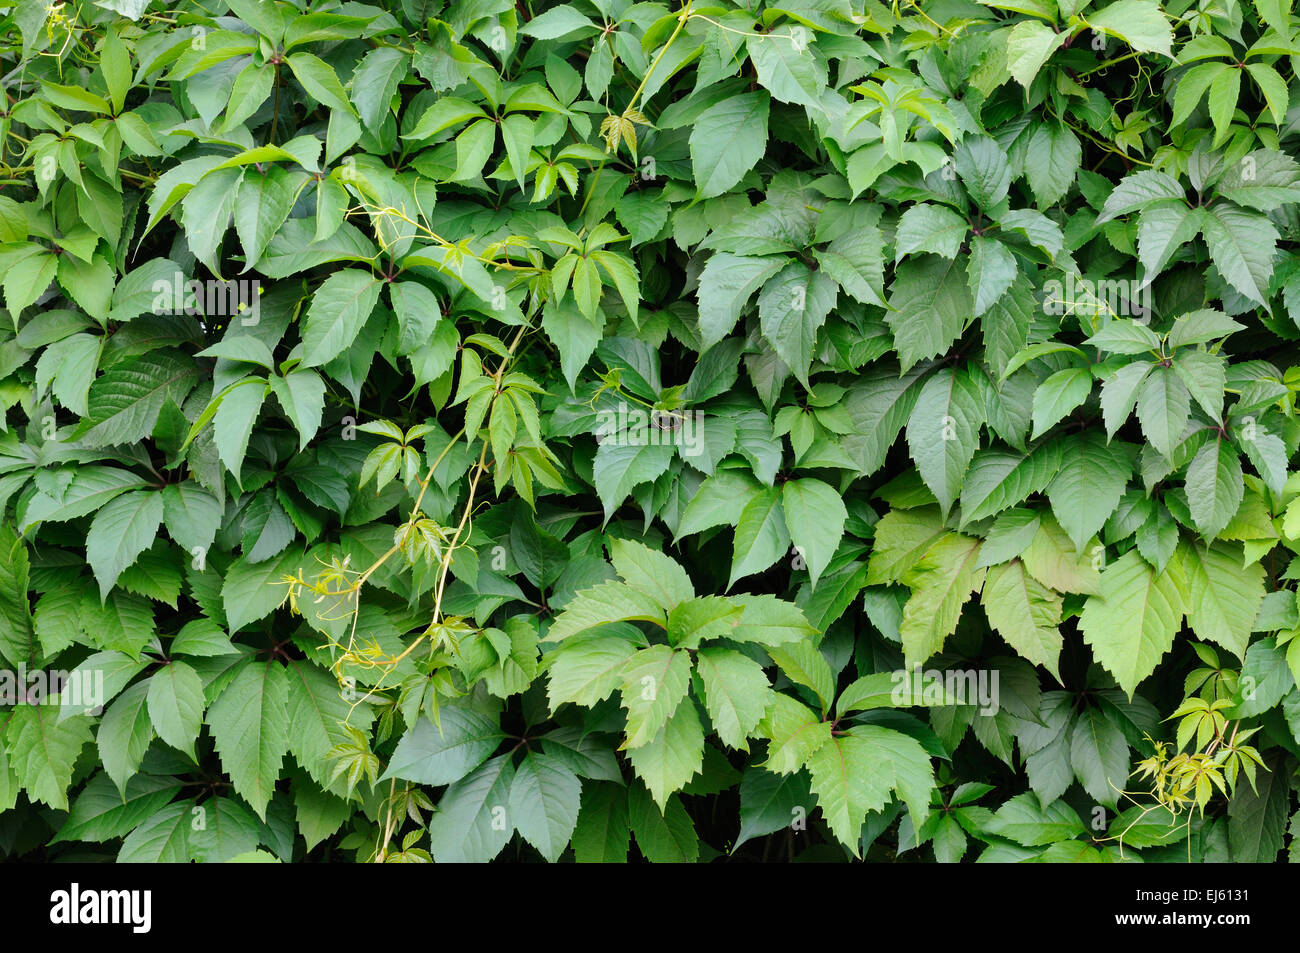 Climbing plant makes green wall as a background Stock Photo